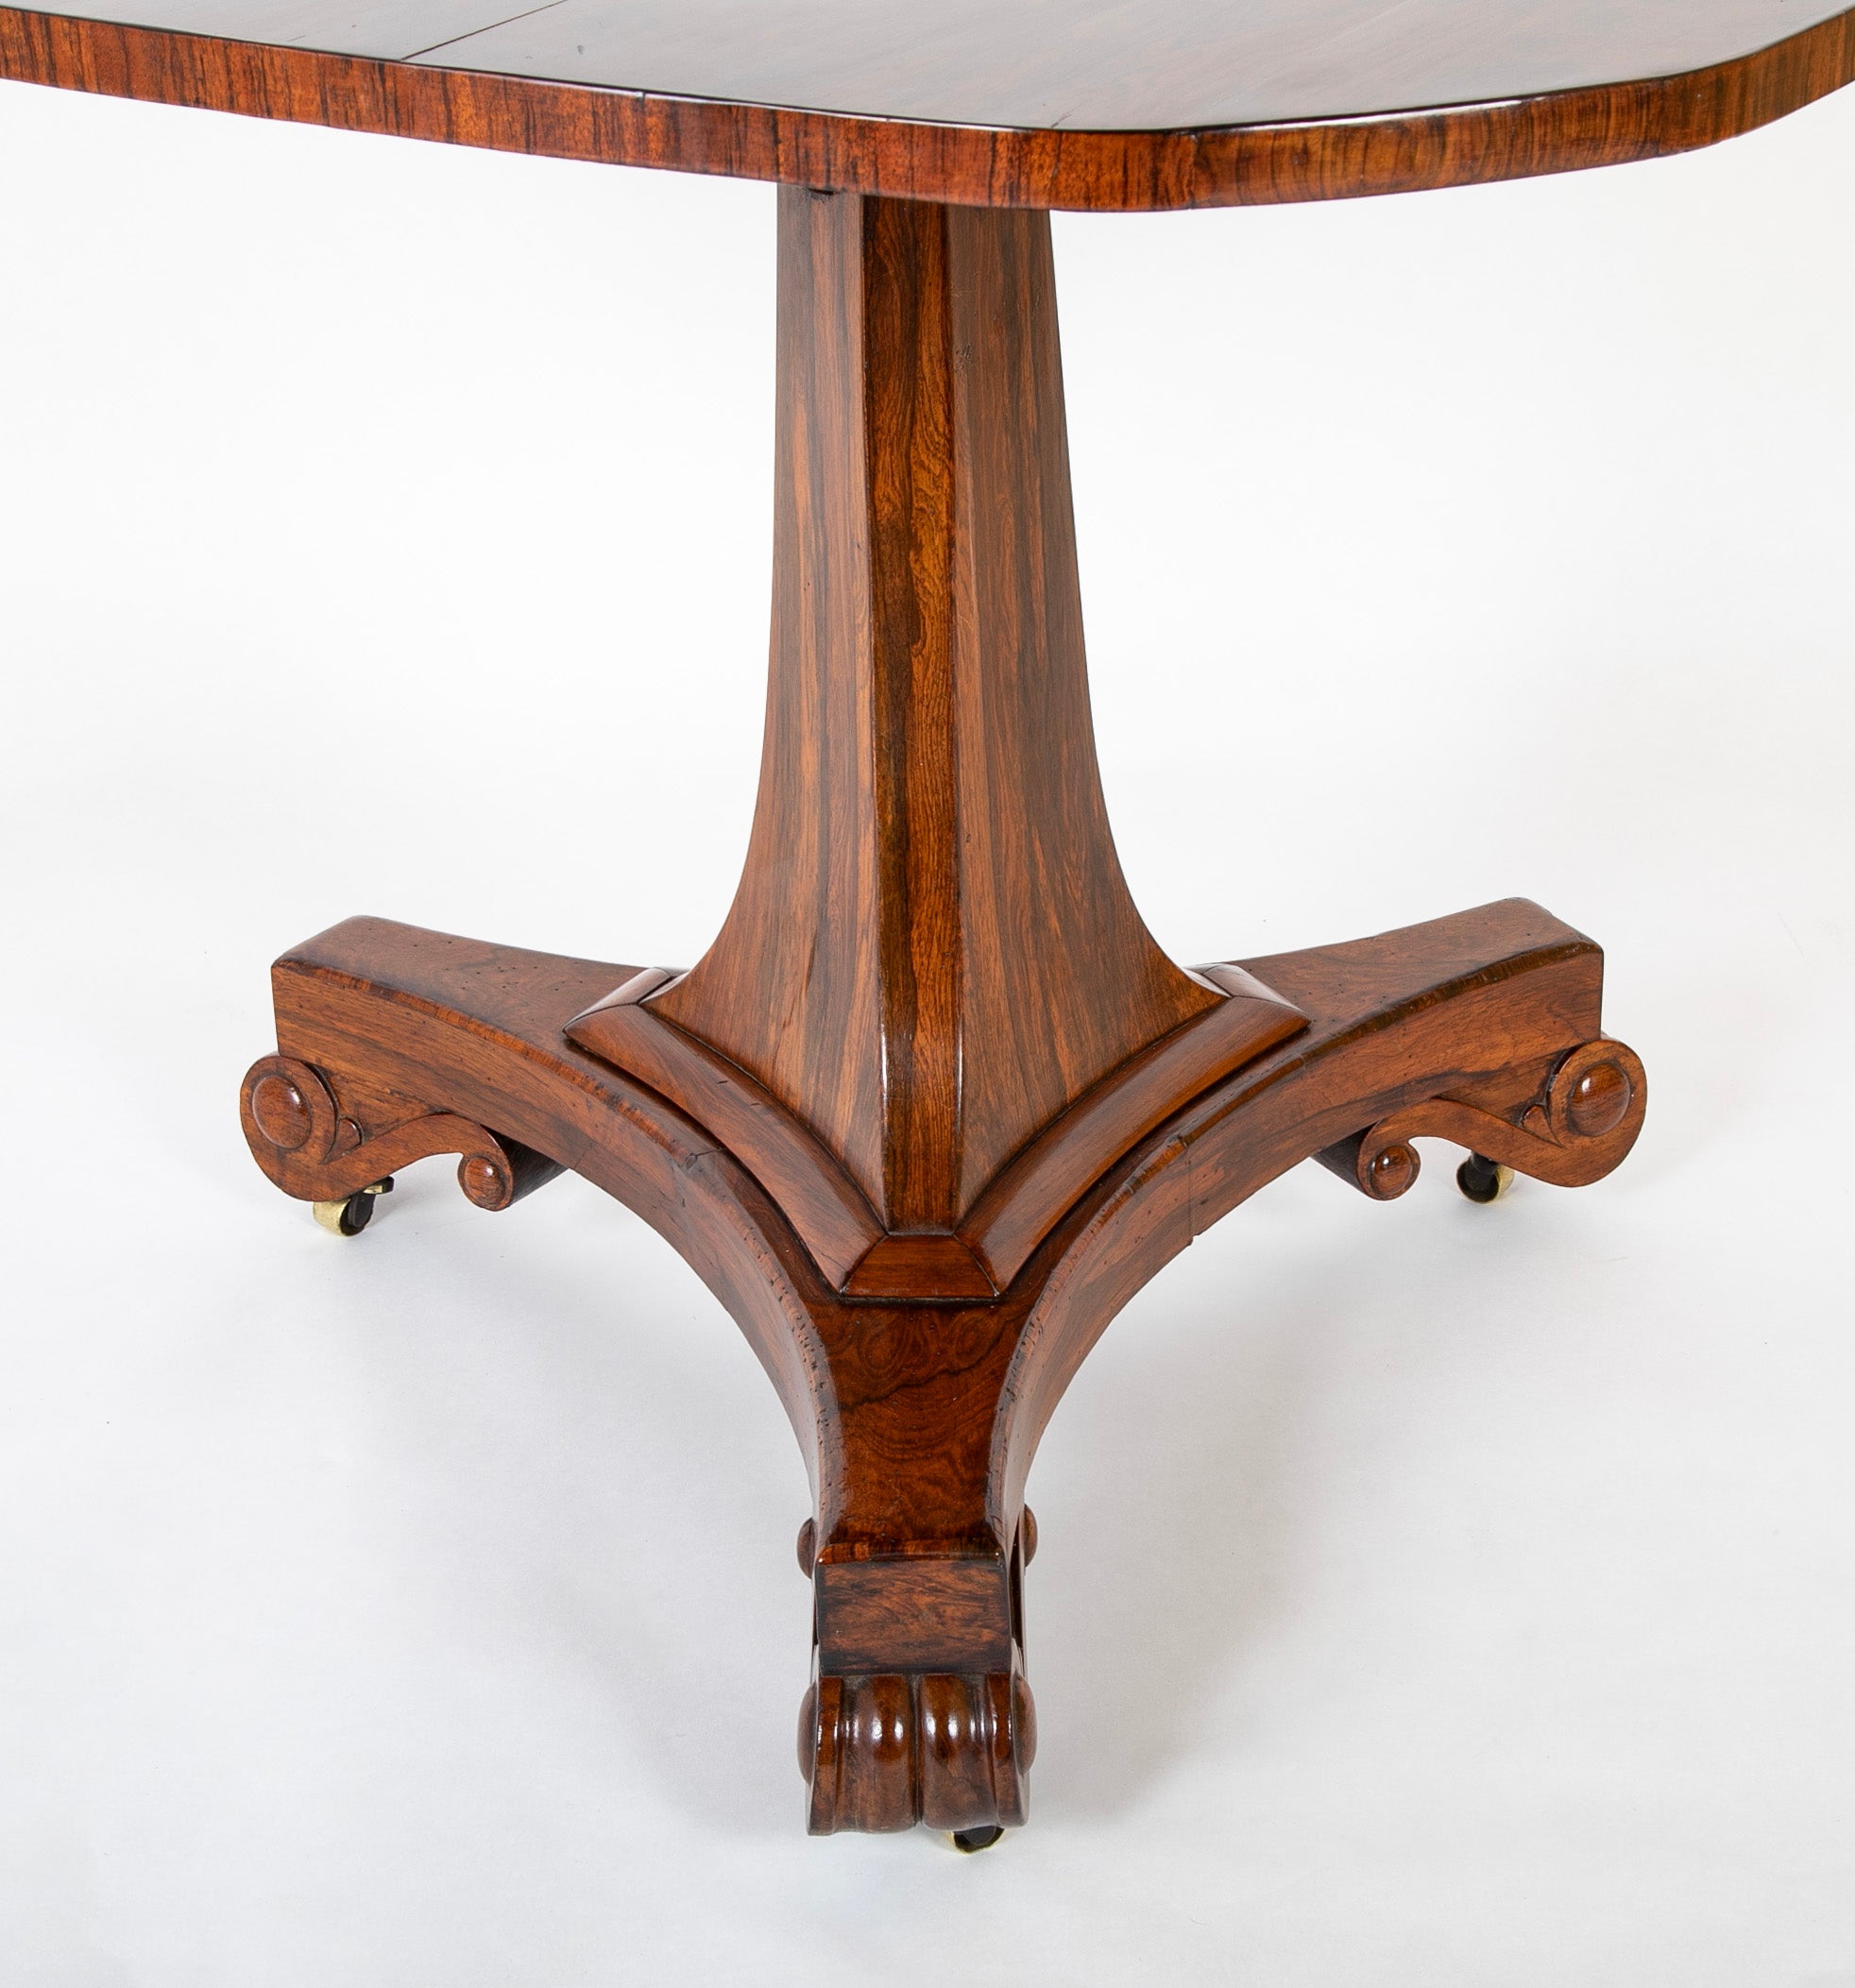 An Early 19th Century English Rosewood Top Breakfast Table